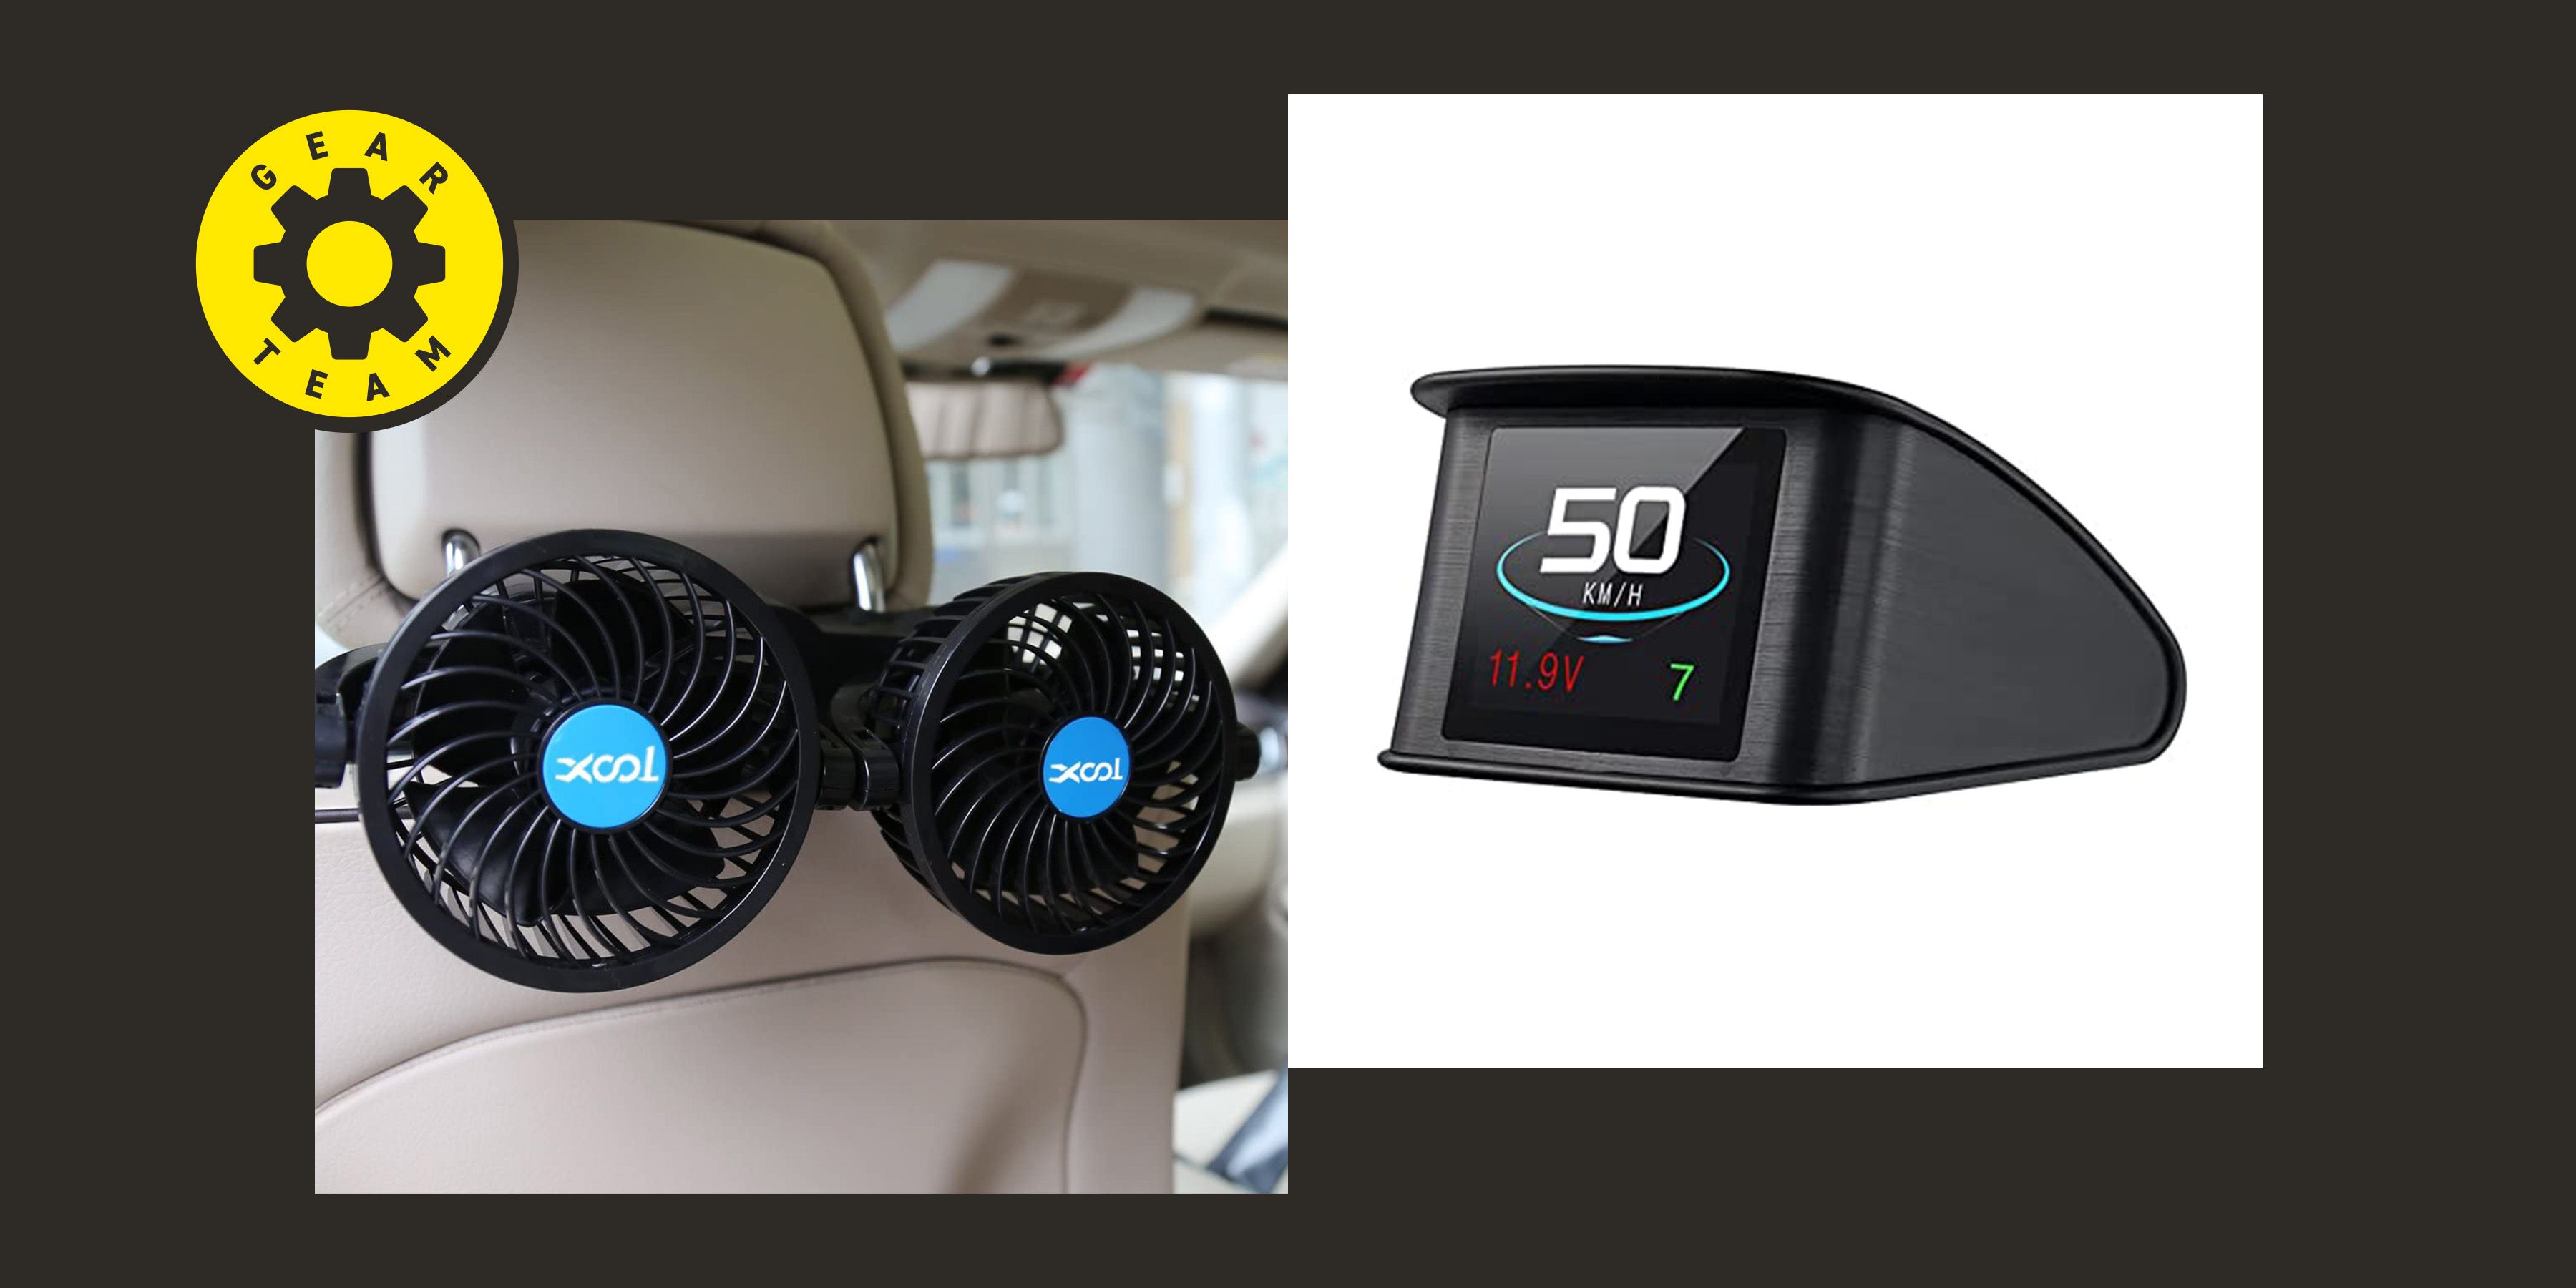 41 Cool Car Accessories You Didn't Know You Needed